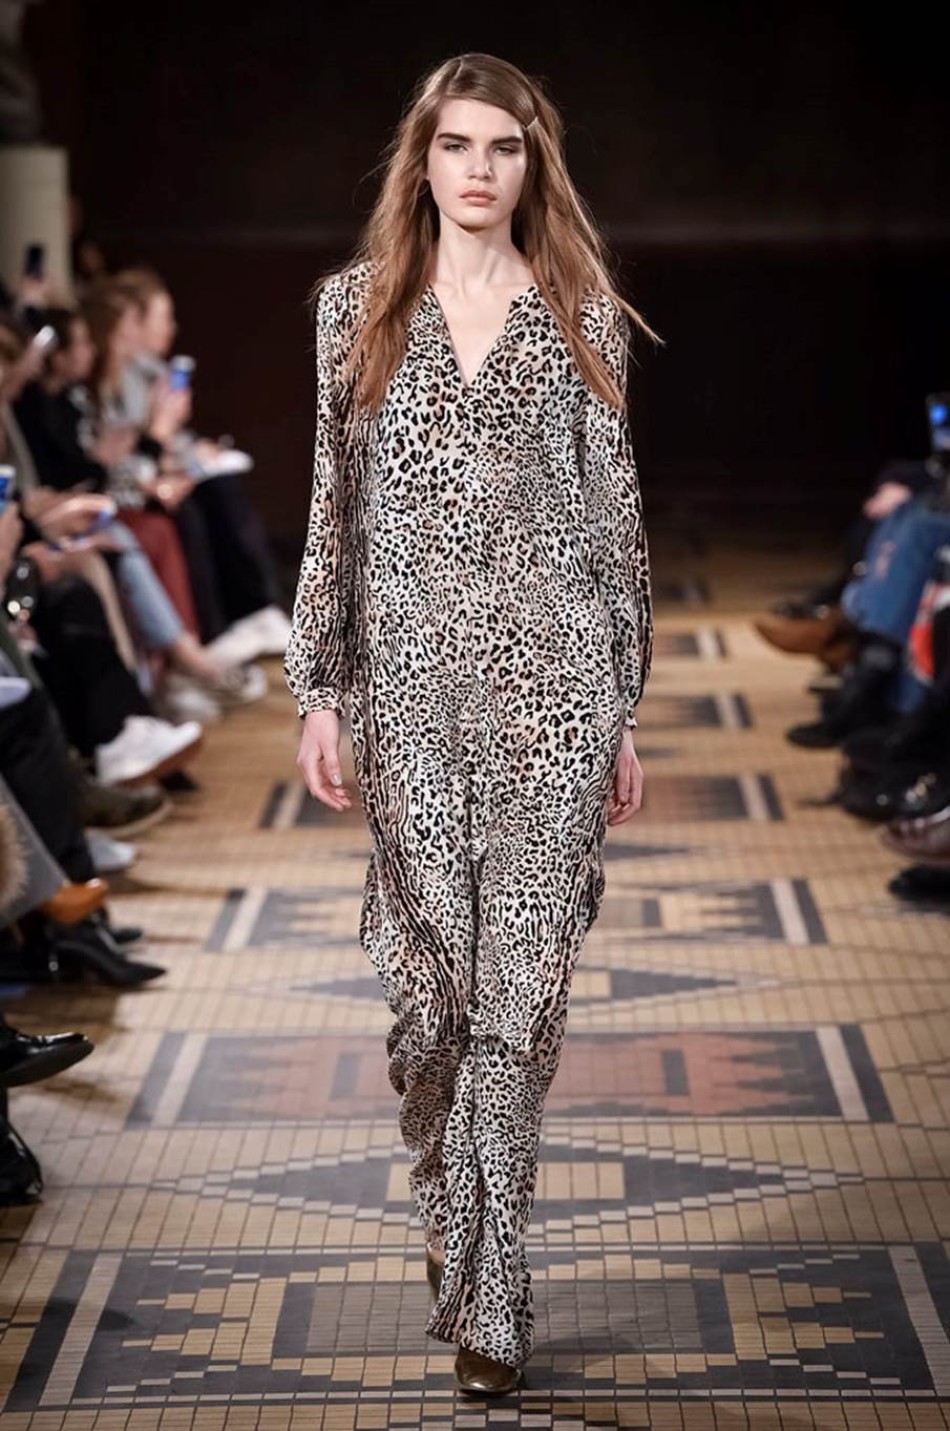 See the key looks from the runway in Copenhagen | Envelope